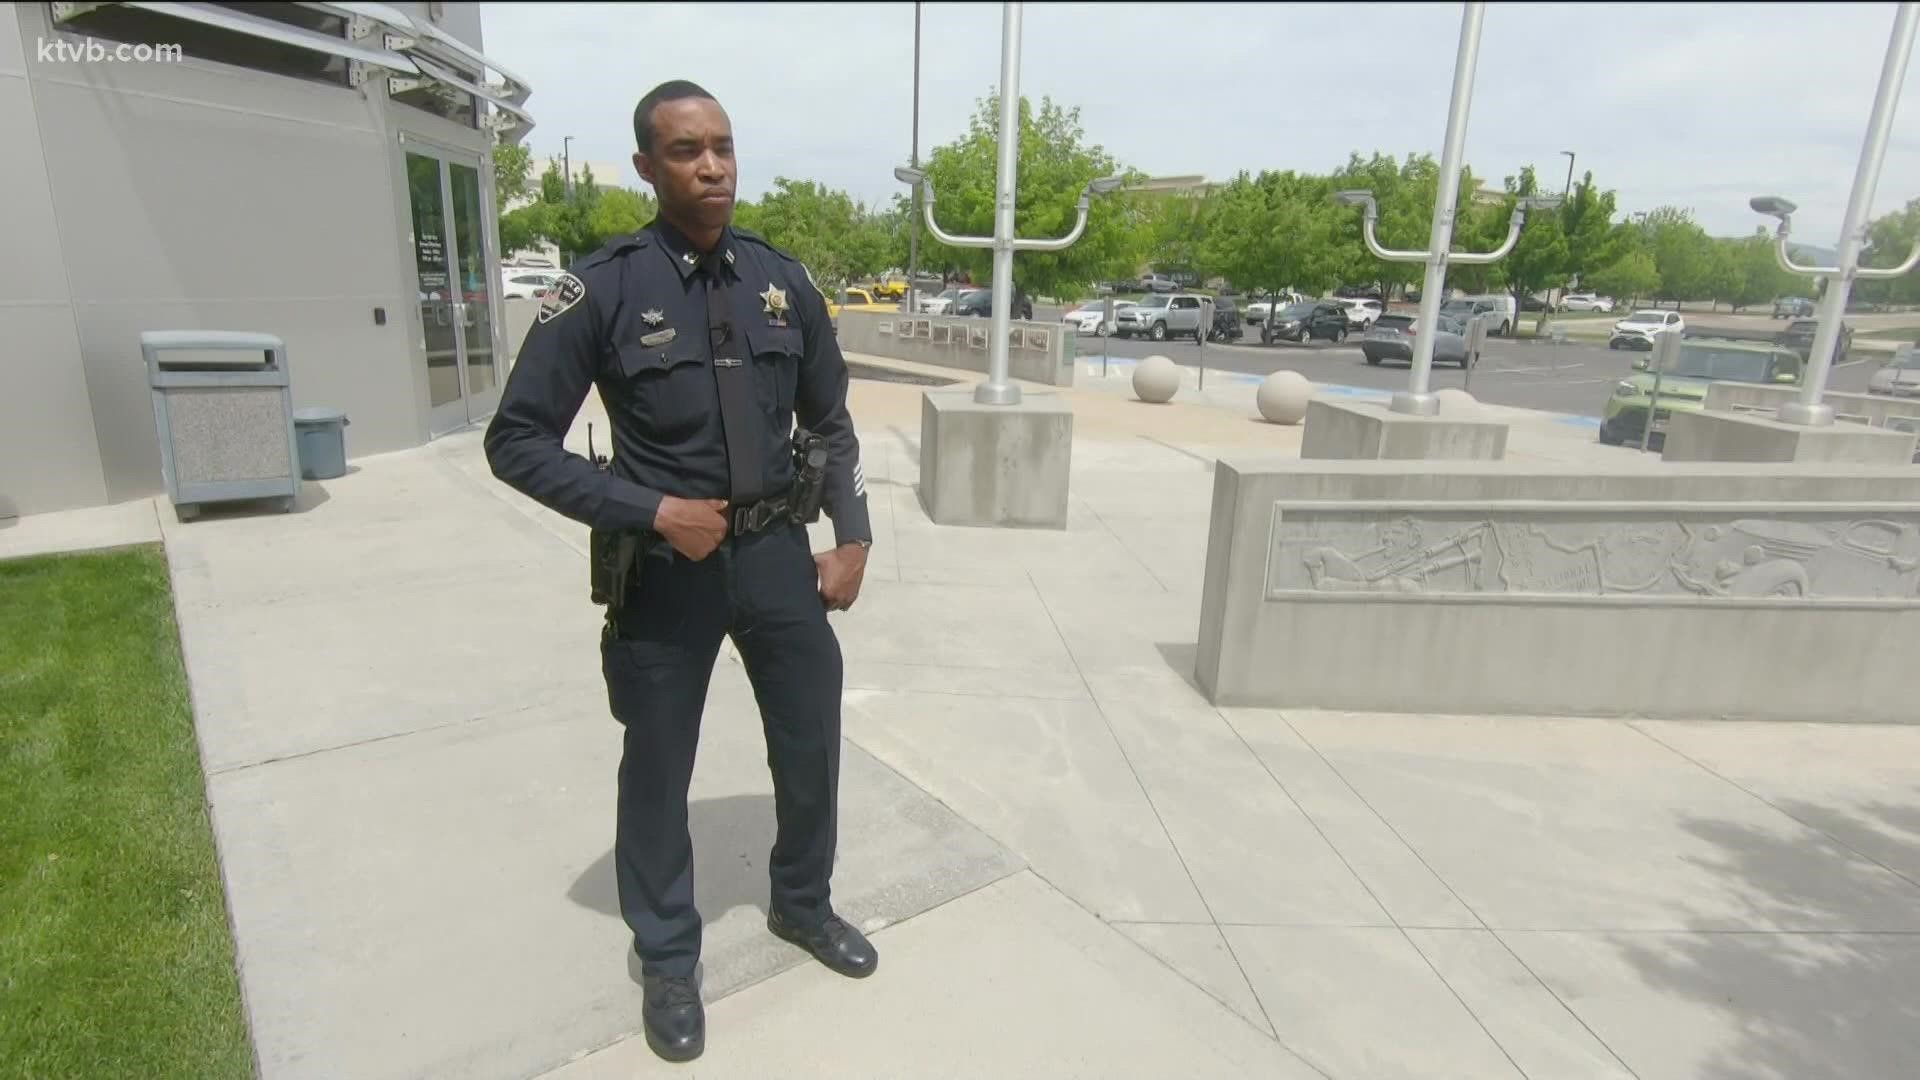 Police departments around the Treasure Valley told KTVB they offer their SROs some of the best training when it comes to active shooter and active killing events.